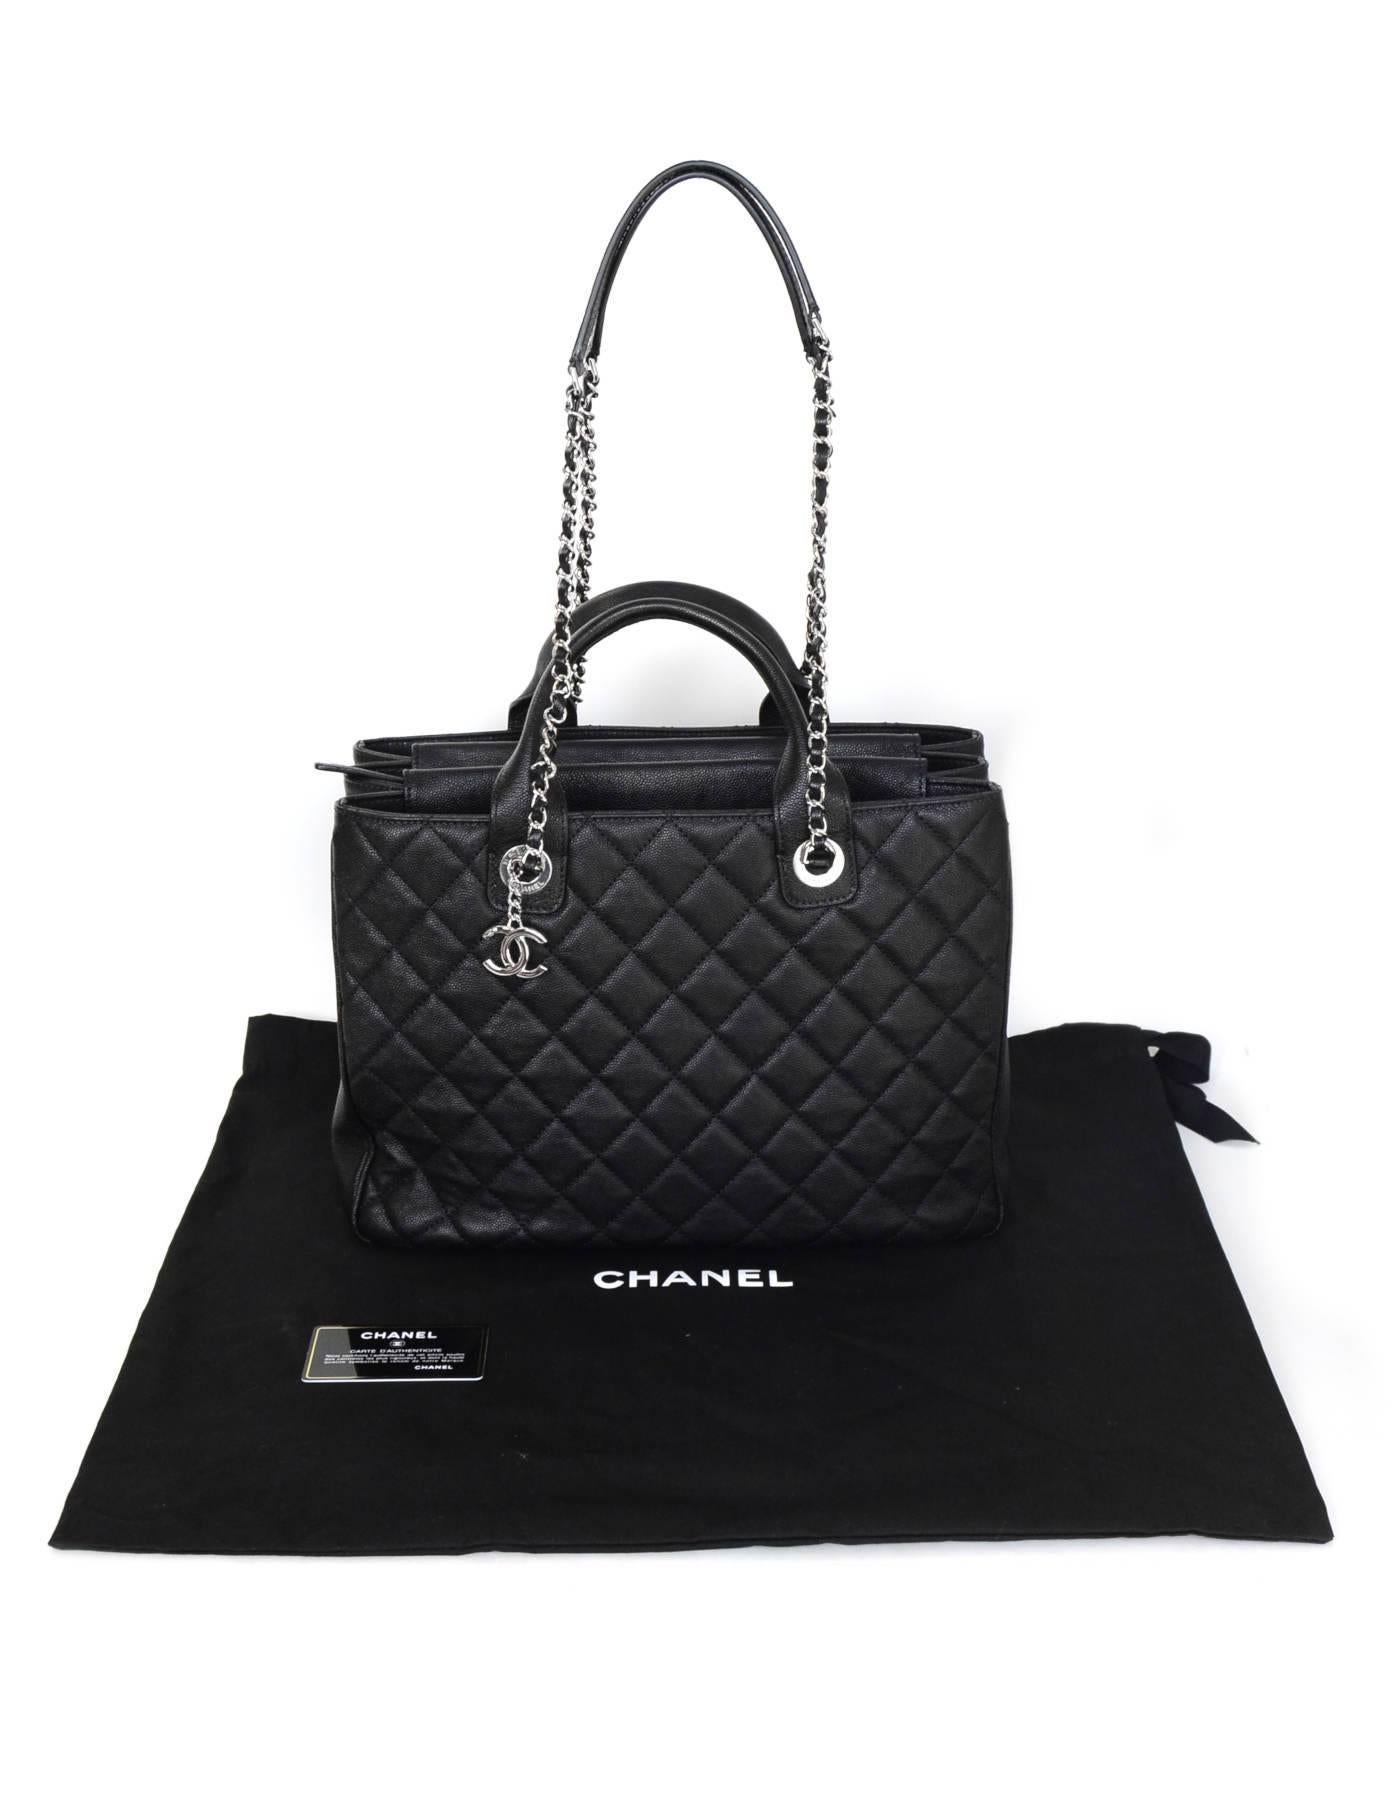 Chanel 2018 Black Quilted Caviar Shopping Satchel Bag with DB 5